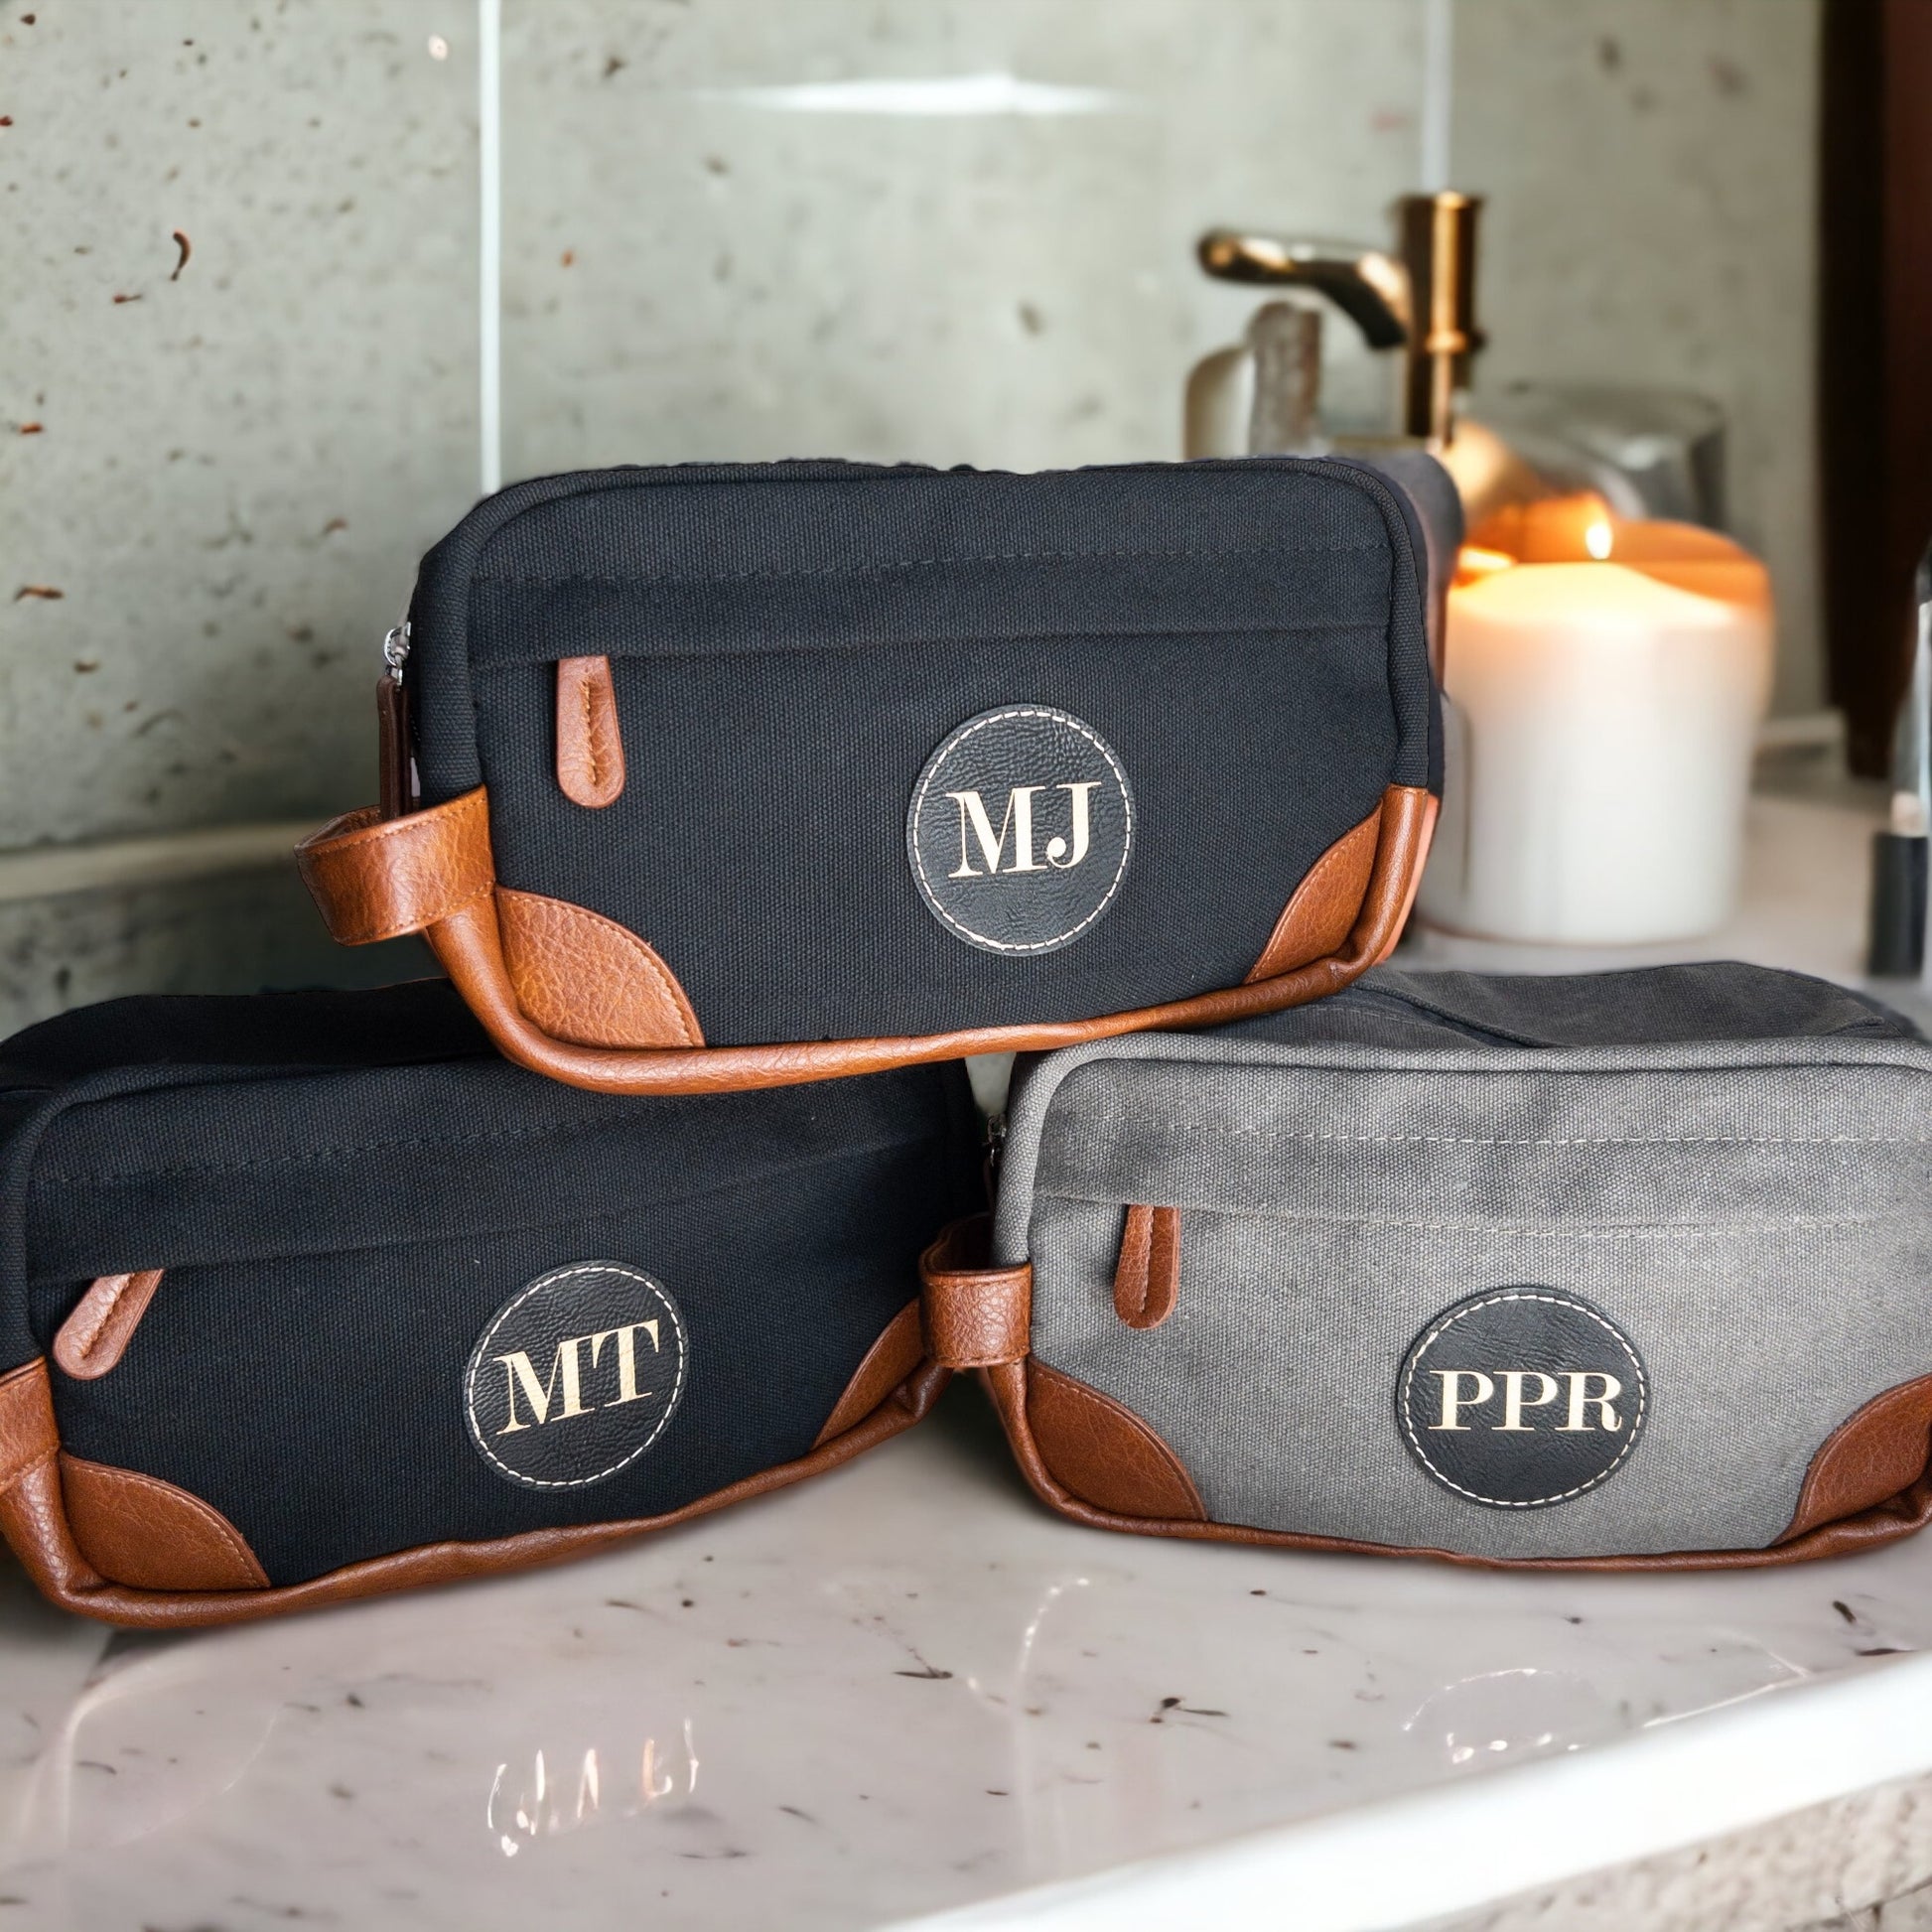 Stylish travel toiletry bag, suspended to display its features. A standout customizable leather patch accents its elegant design.